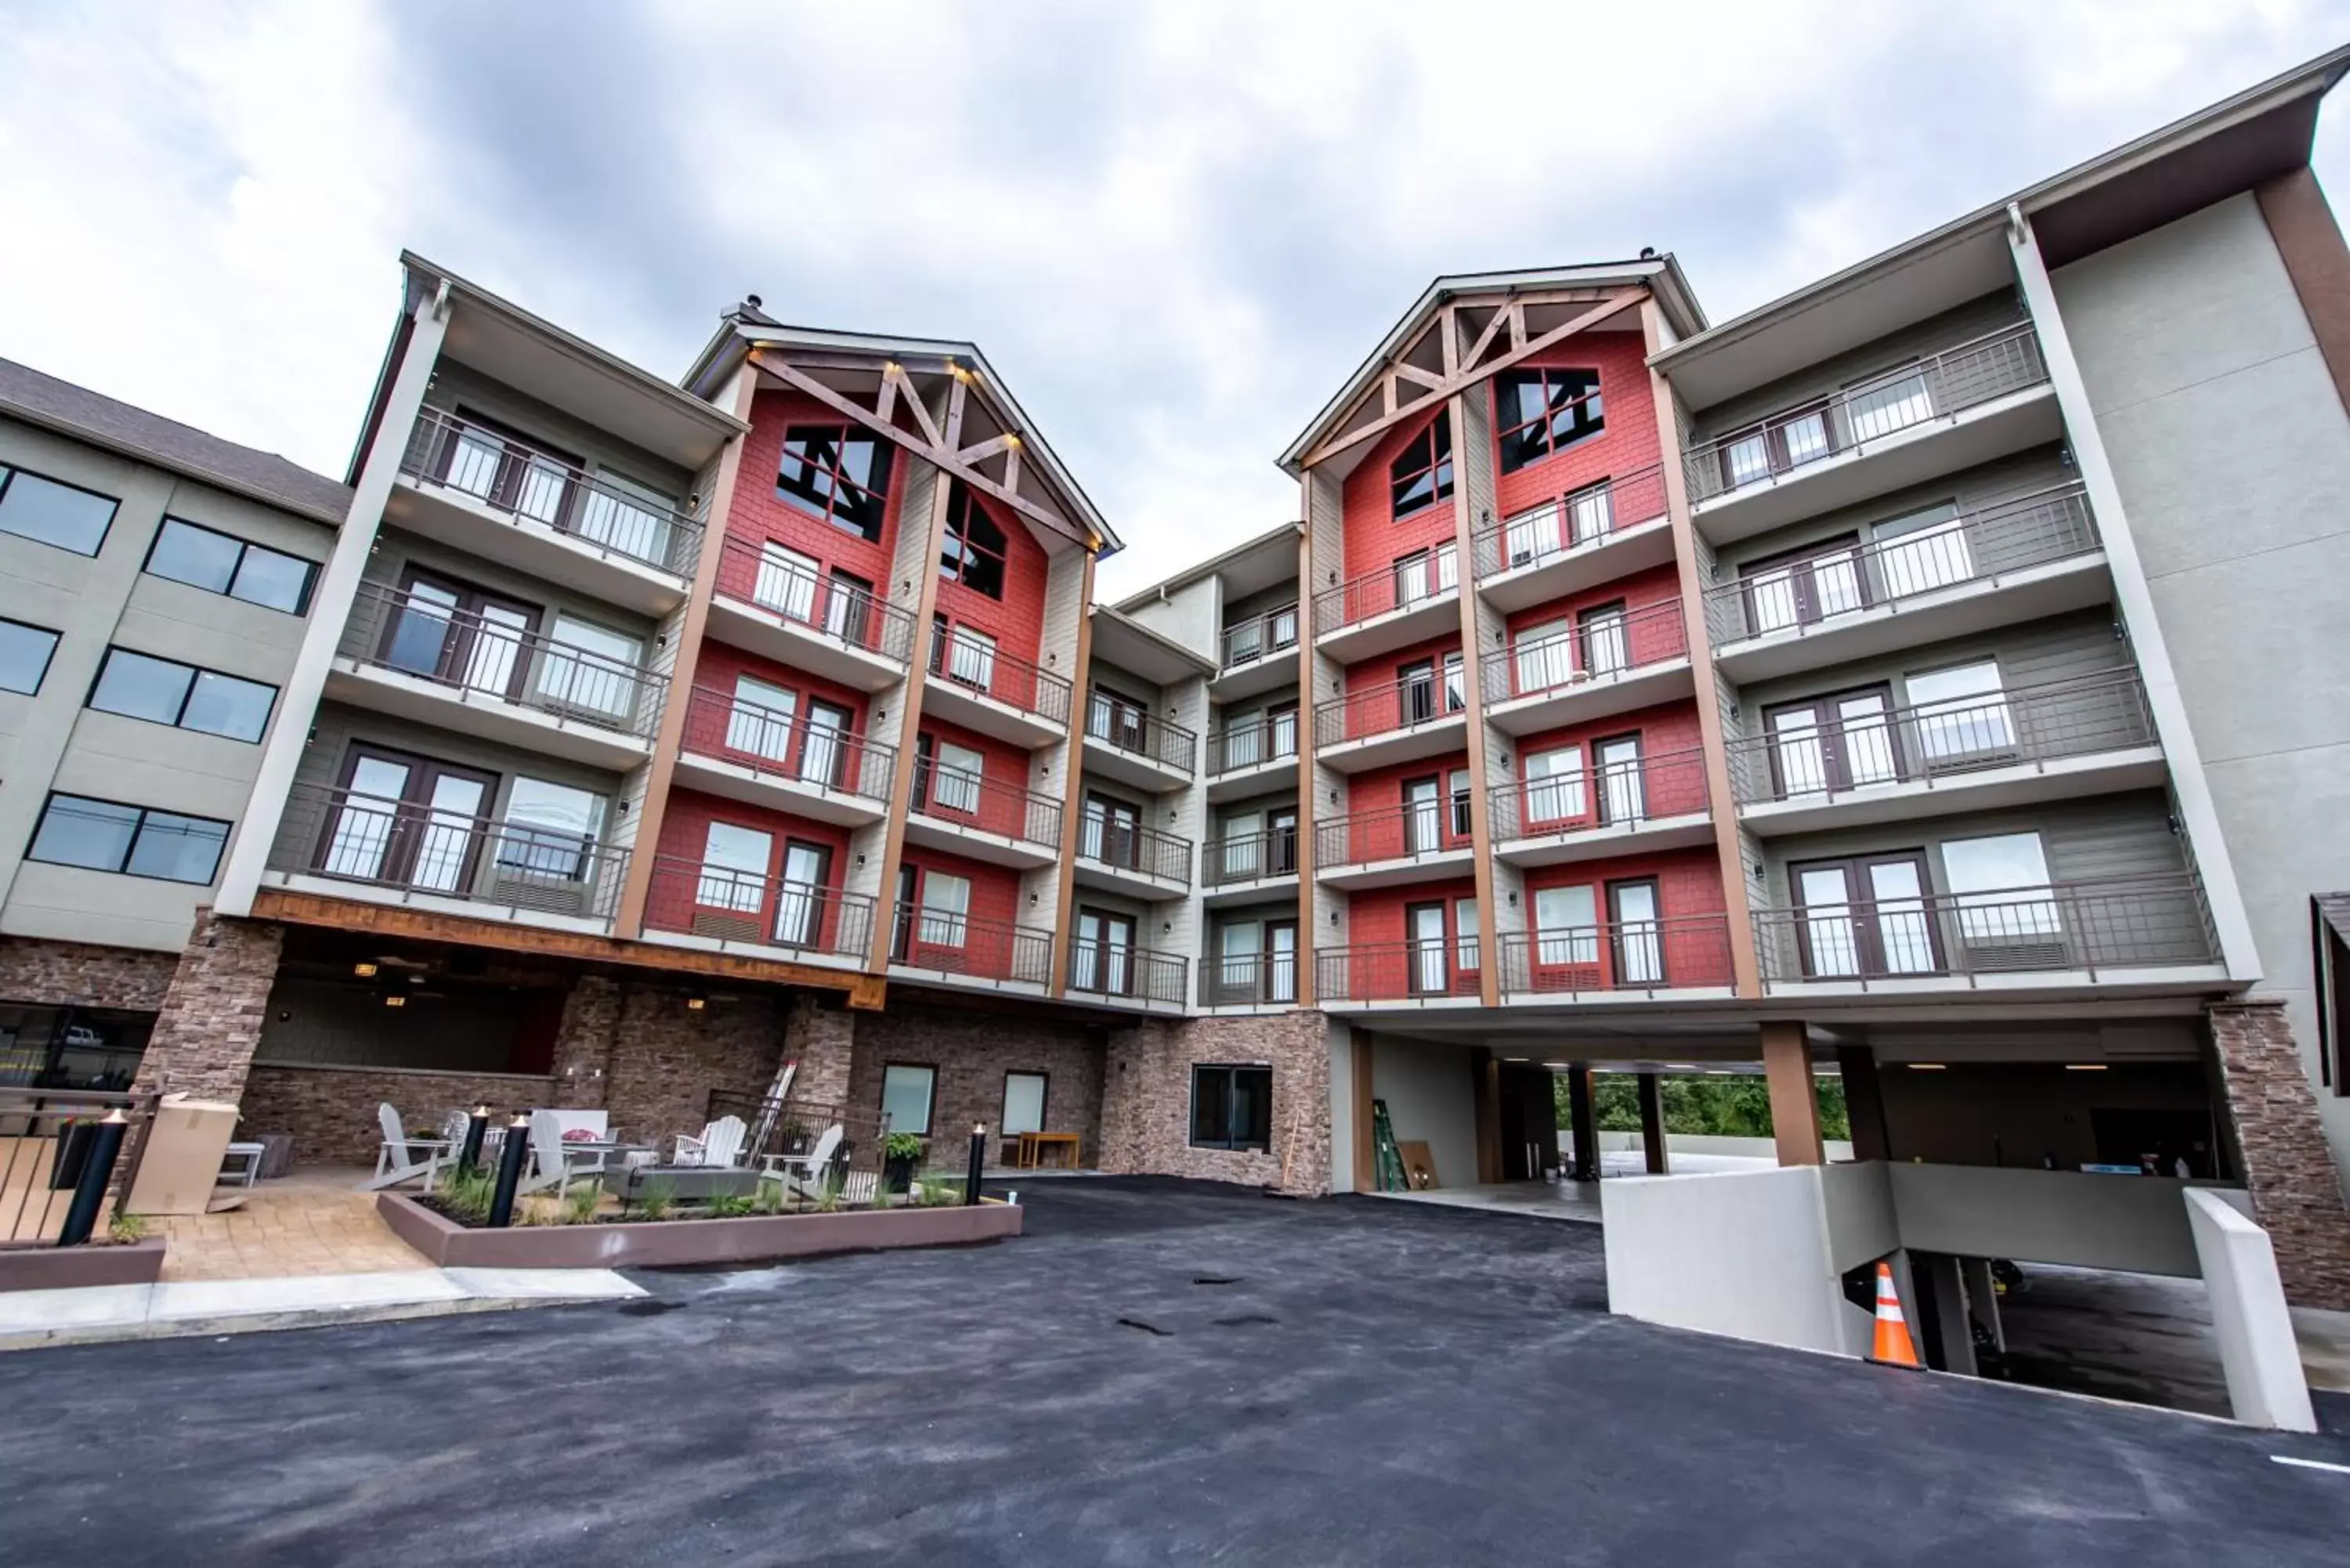 Property Building in Best Western Plus Apple Valley Lodge Pigeon Forge